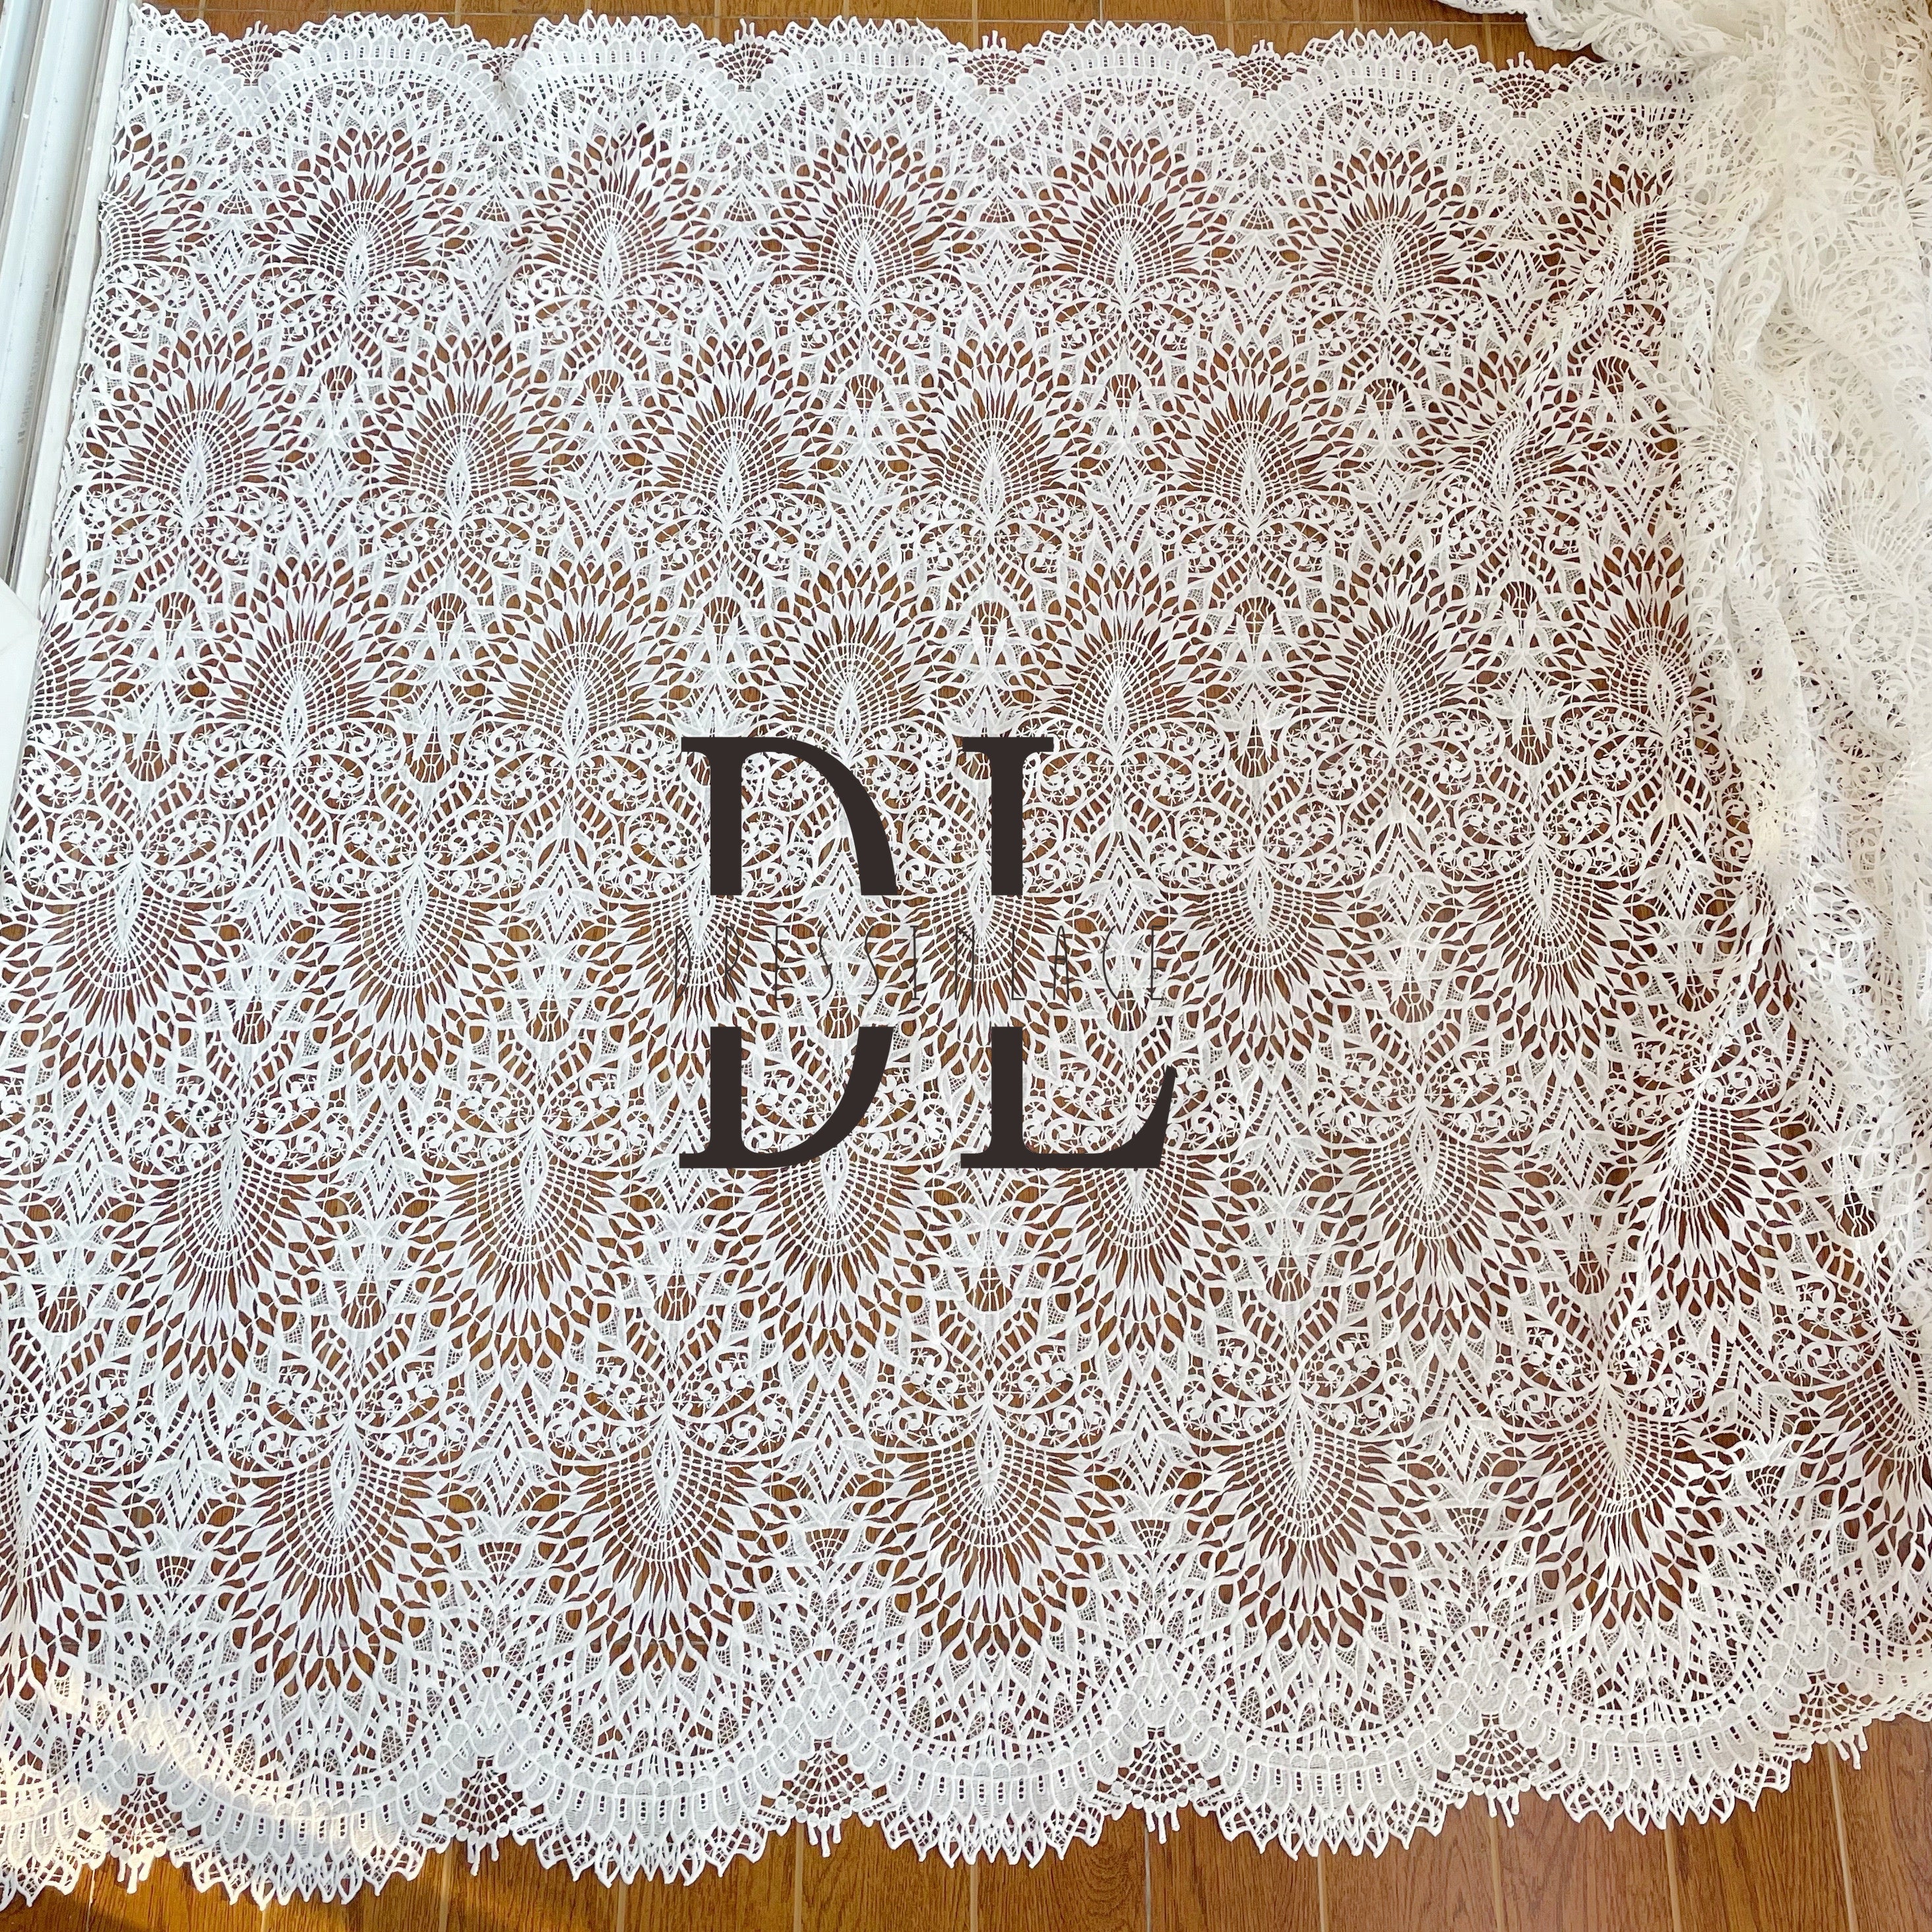 DLG120101 Elegant Wedding Dress Lace Fabric - Classic Water Soluble Embroidery Lace Material without Mesh  DLG120101